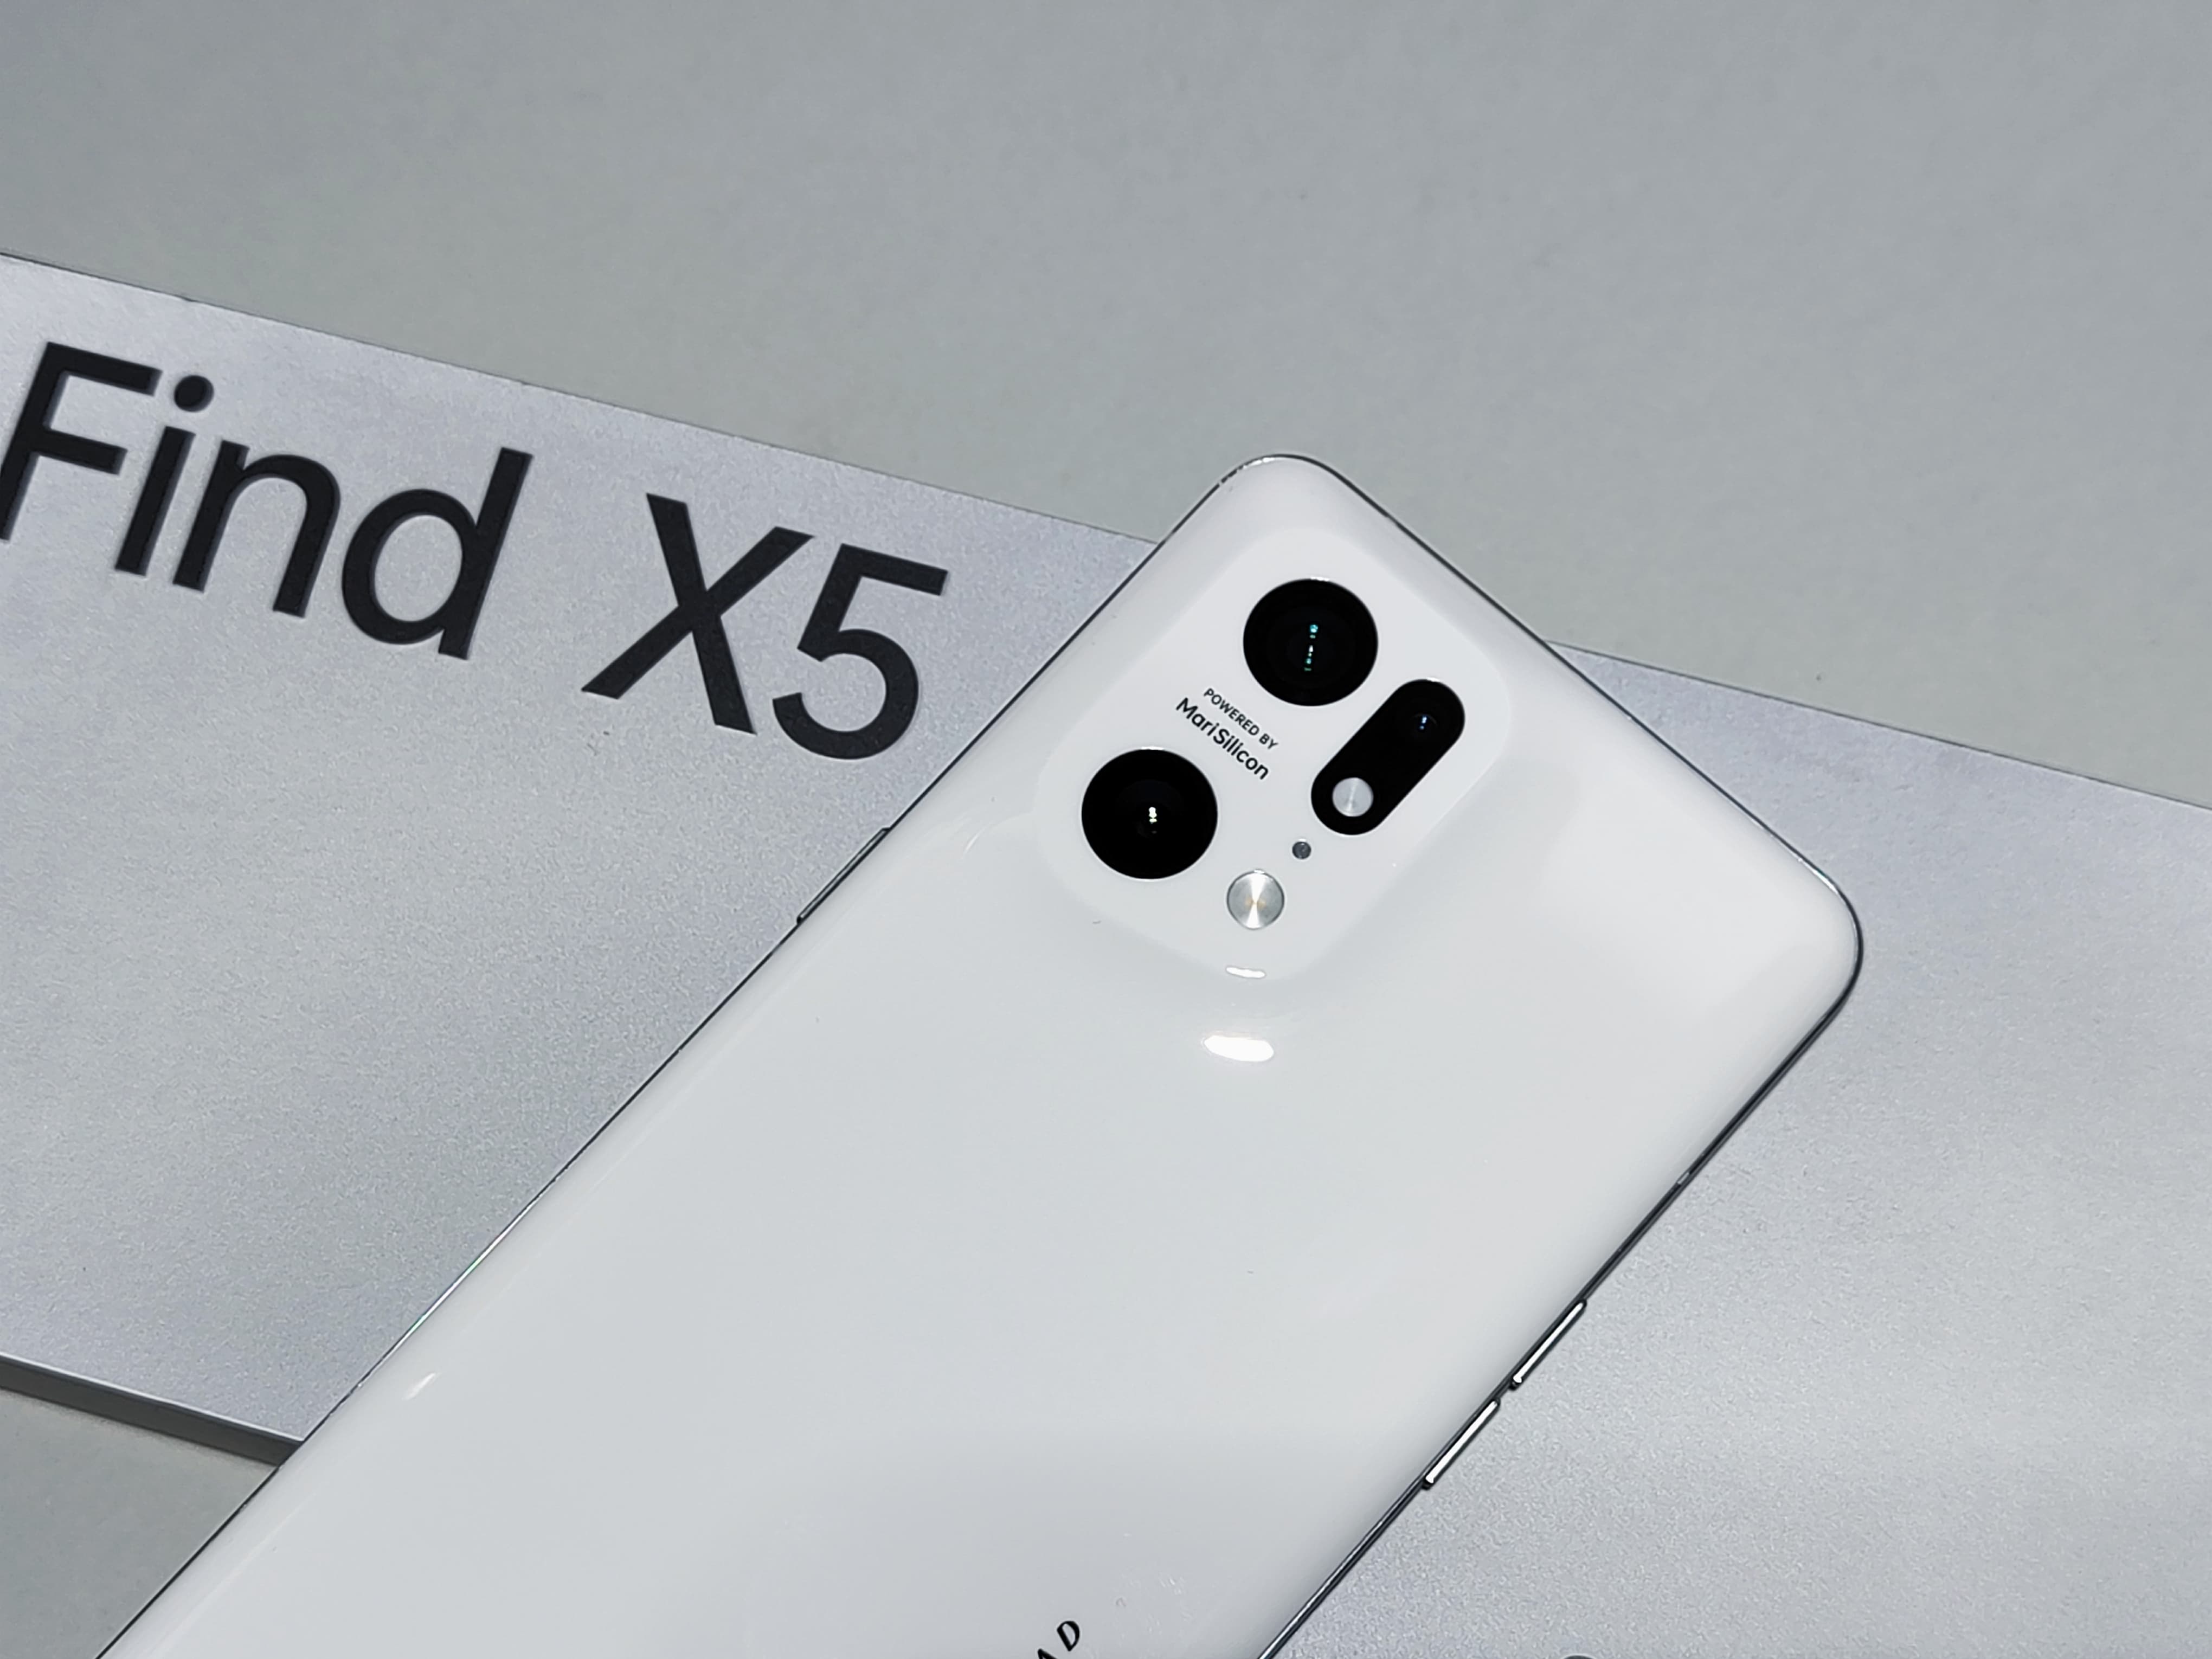 Find X5 Pro Review: the first self-developed chip helps the image strength is amazing